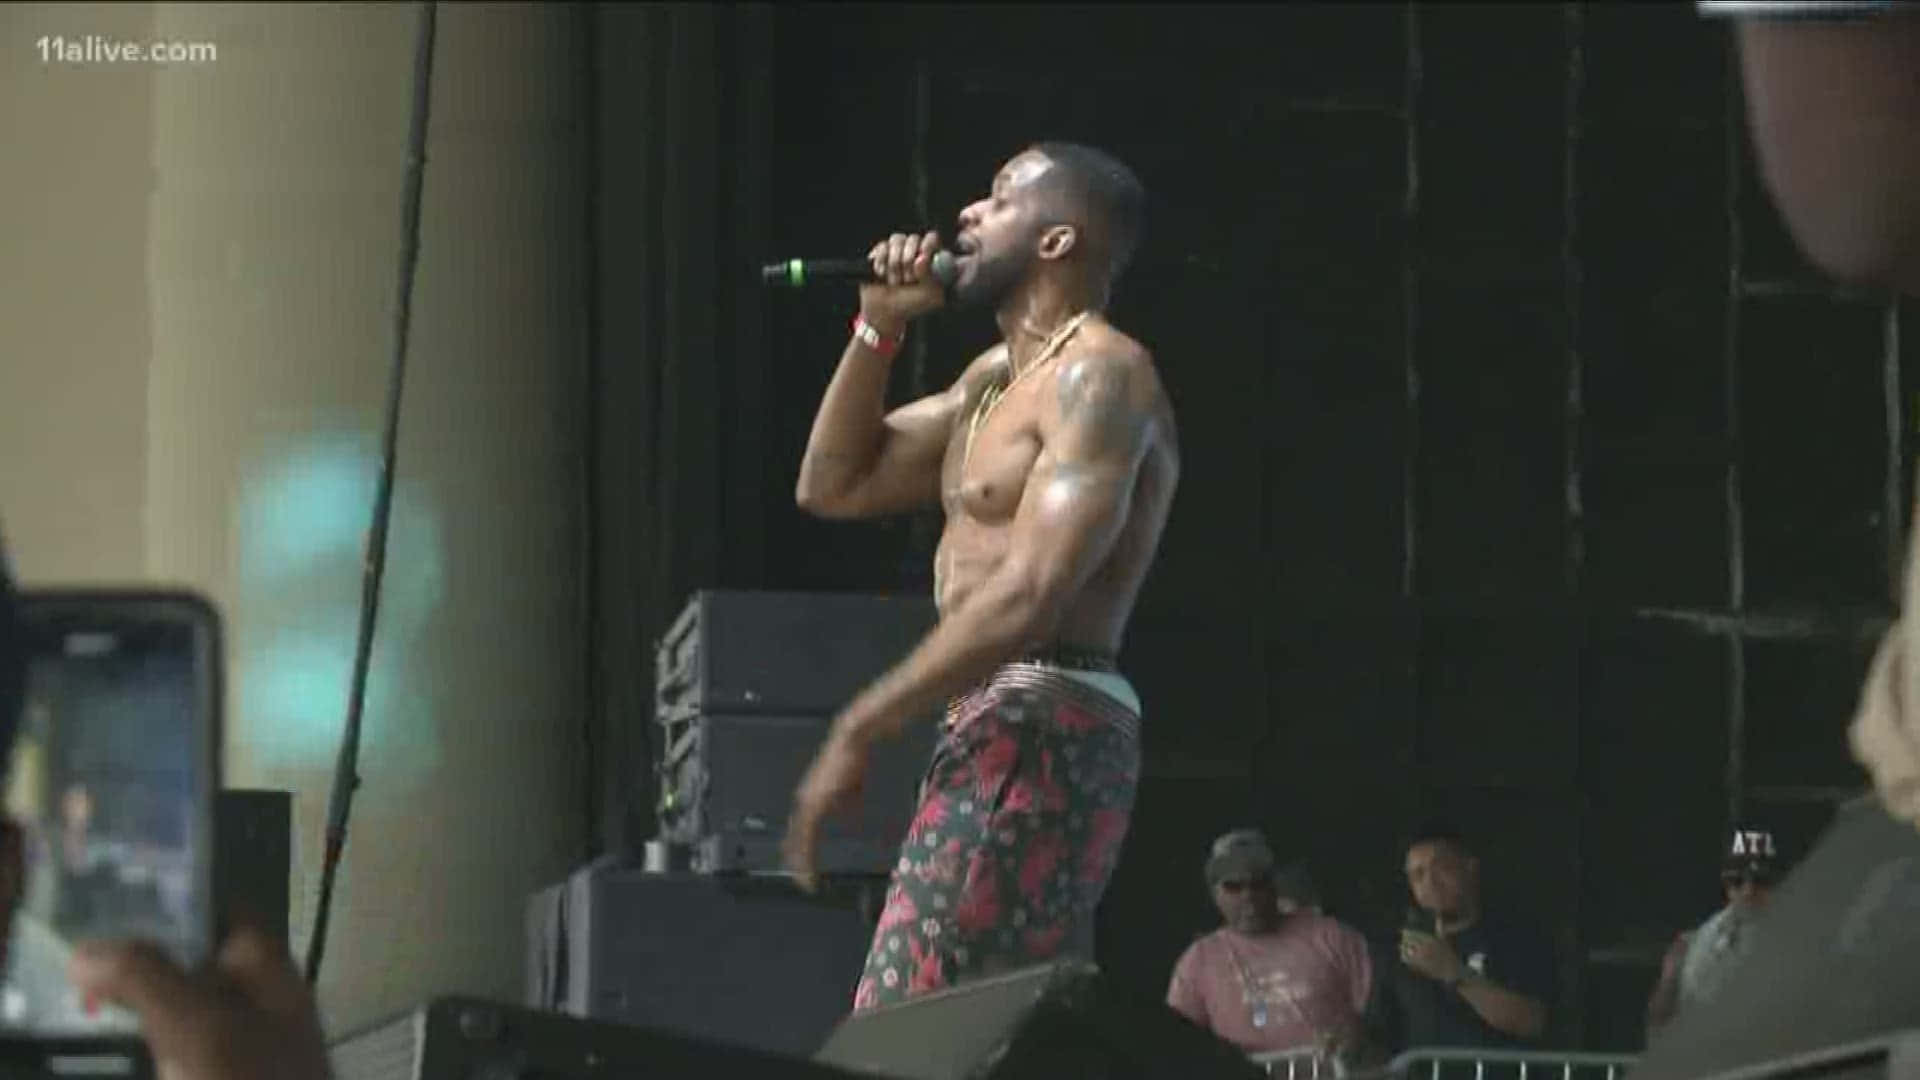 A Man With A Shirt On Is Singing Into A Microphone